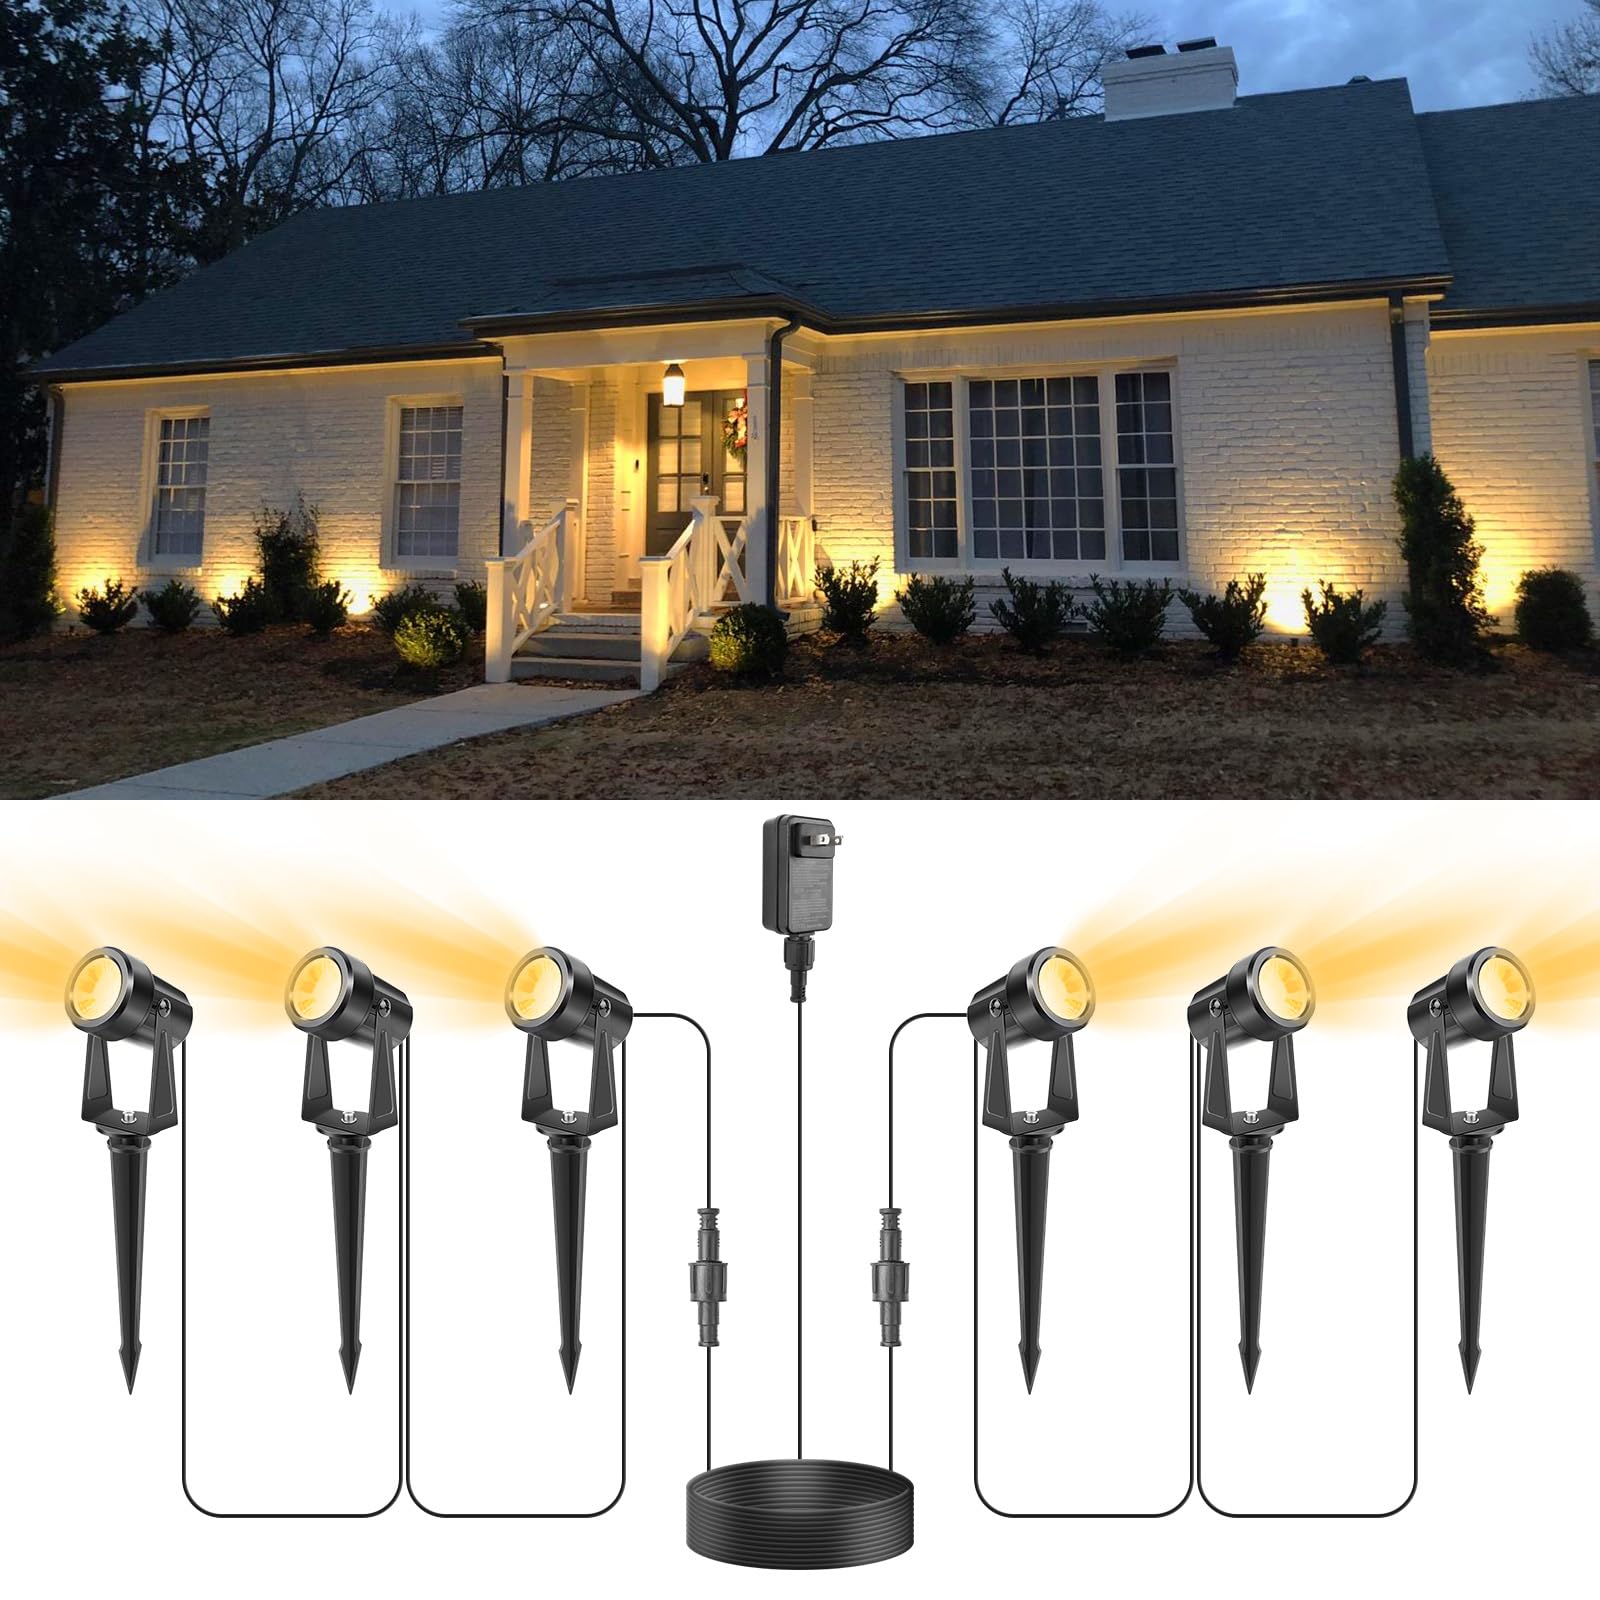 VOLISUN Christmas Outdoor Spotlights,Low Voltage Landscape Lights with Transformer and 75ft Cable,Waterproof Landscape Lighting 